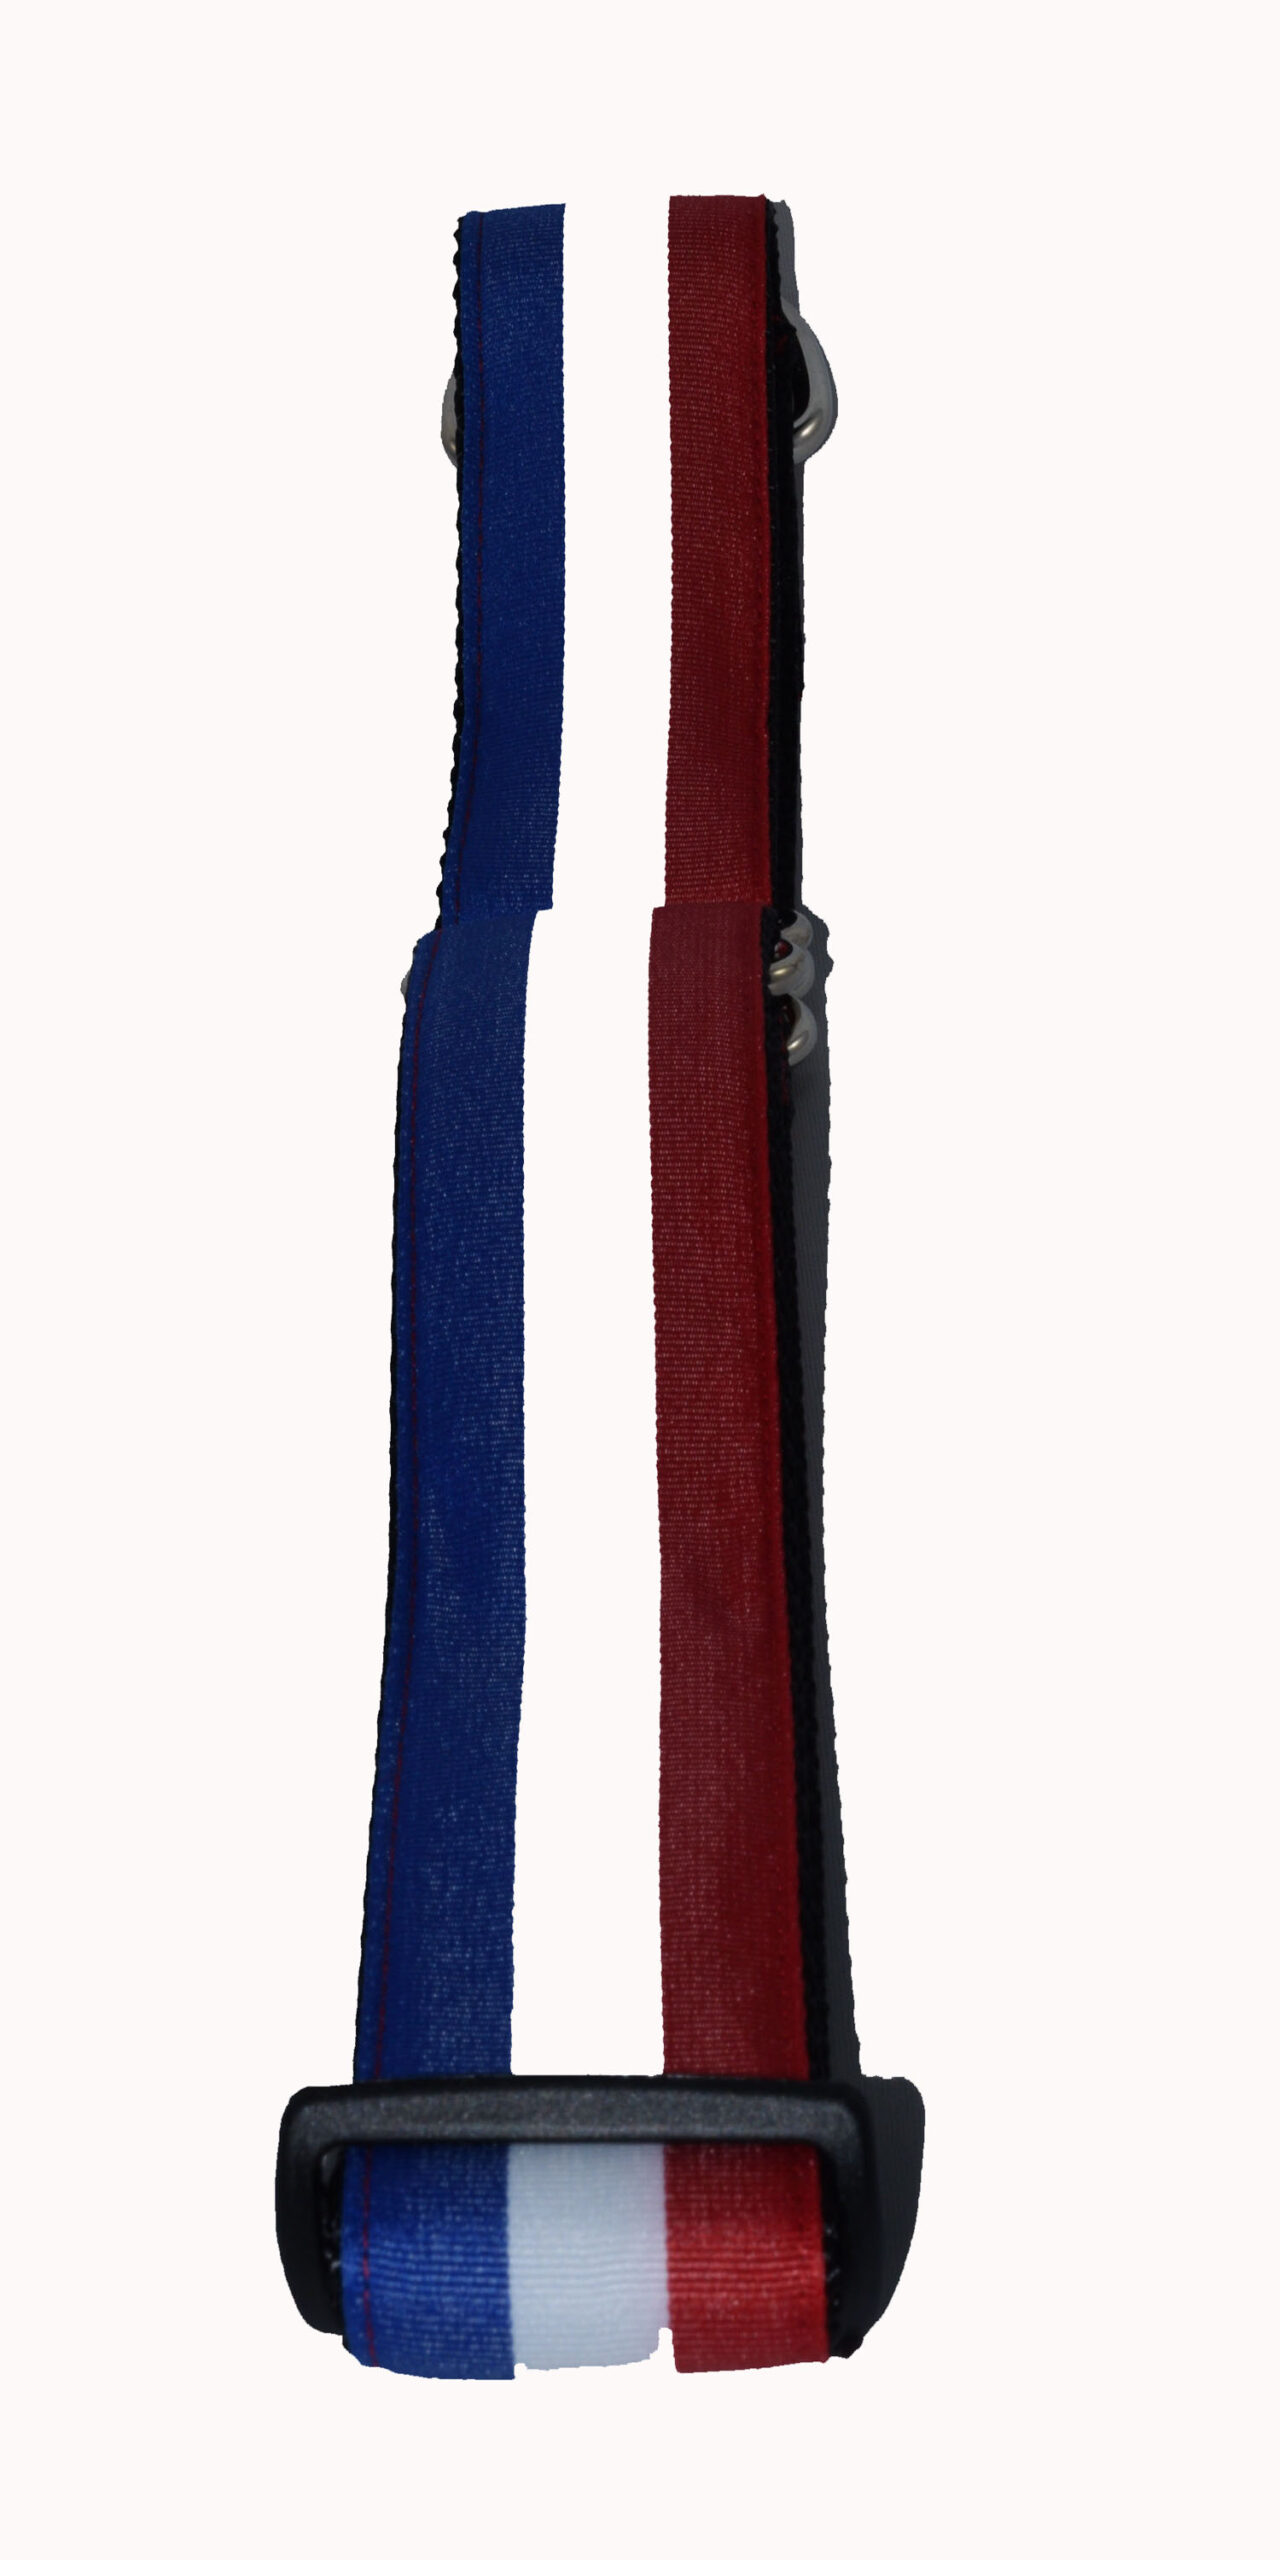 Wide Martingale Stripes Red White Blue Wholesale Dog and Cat Collars